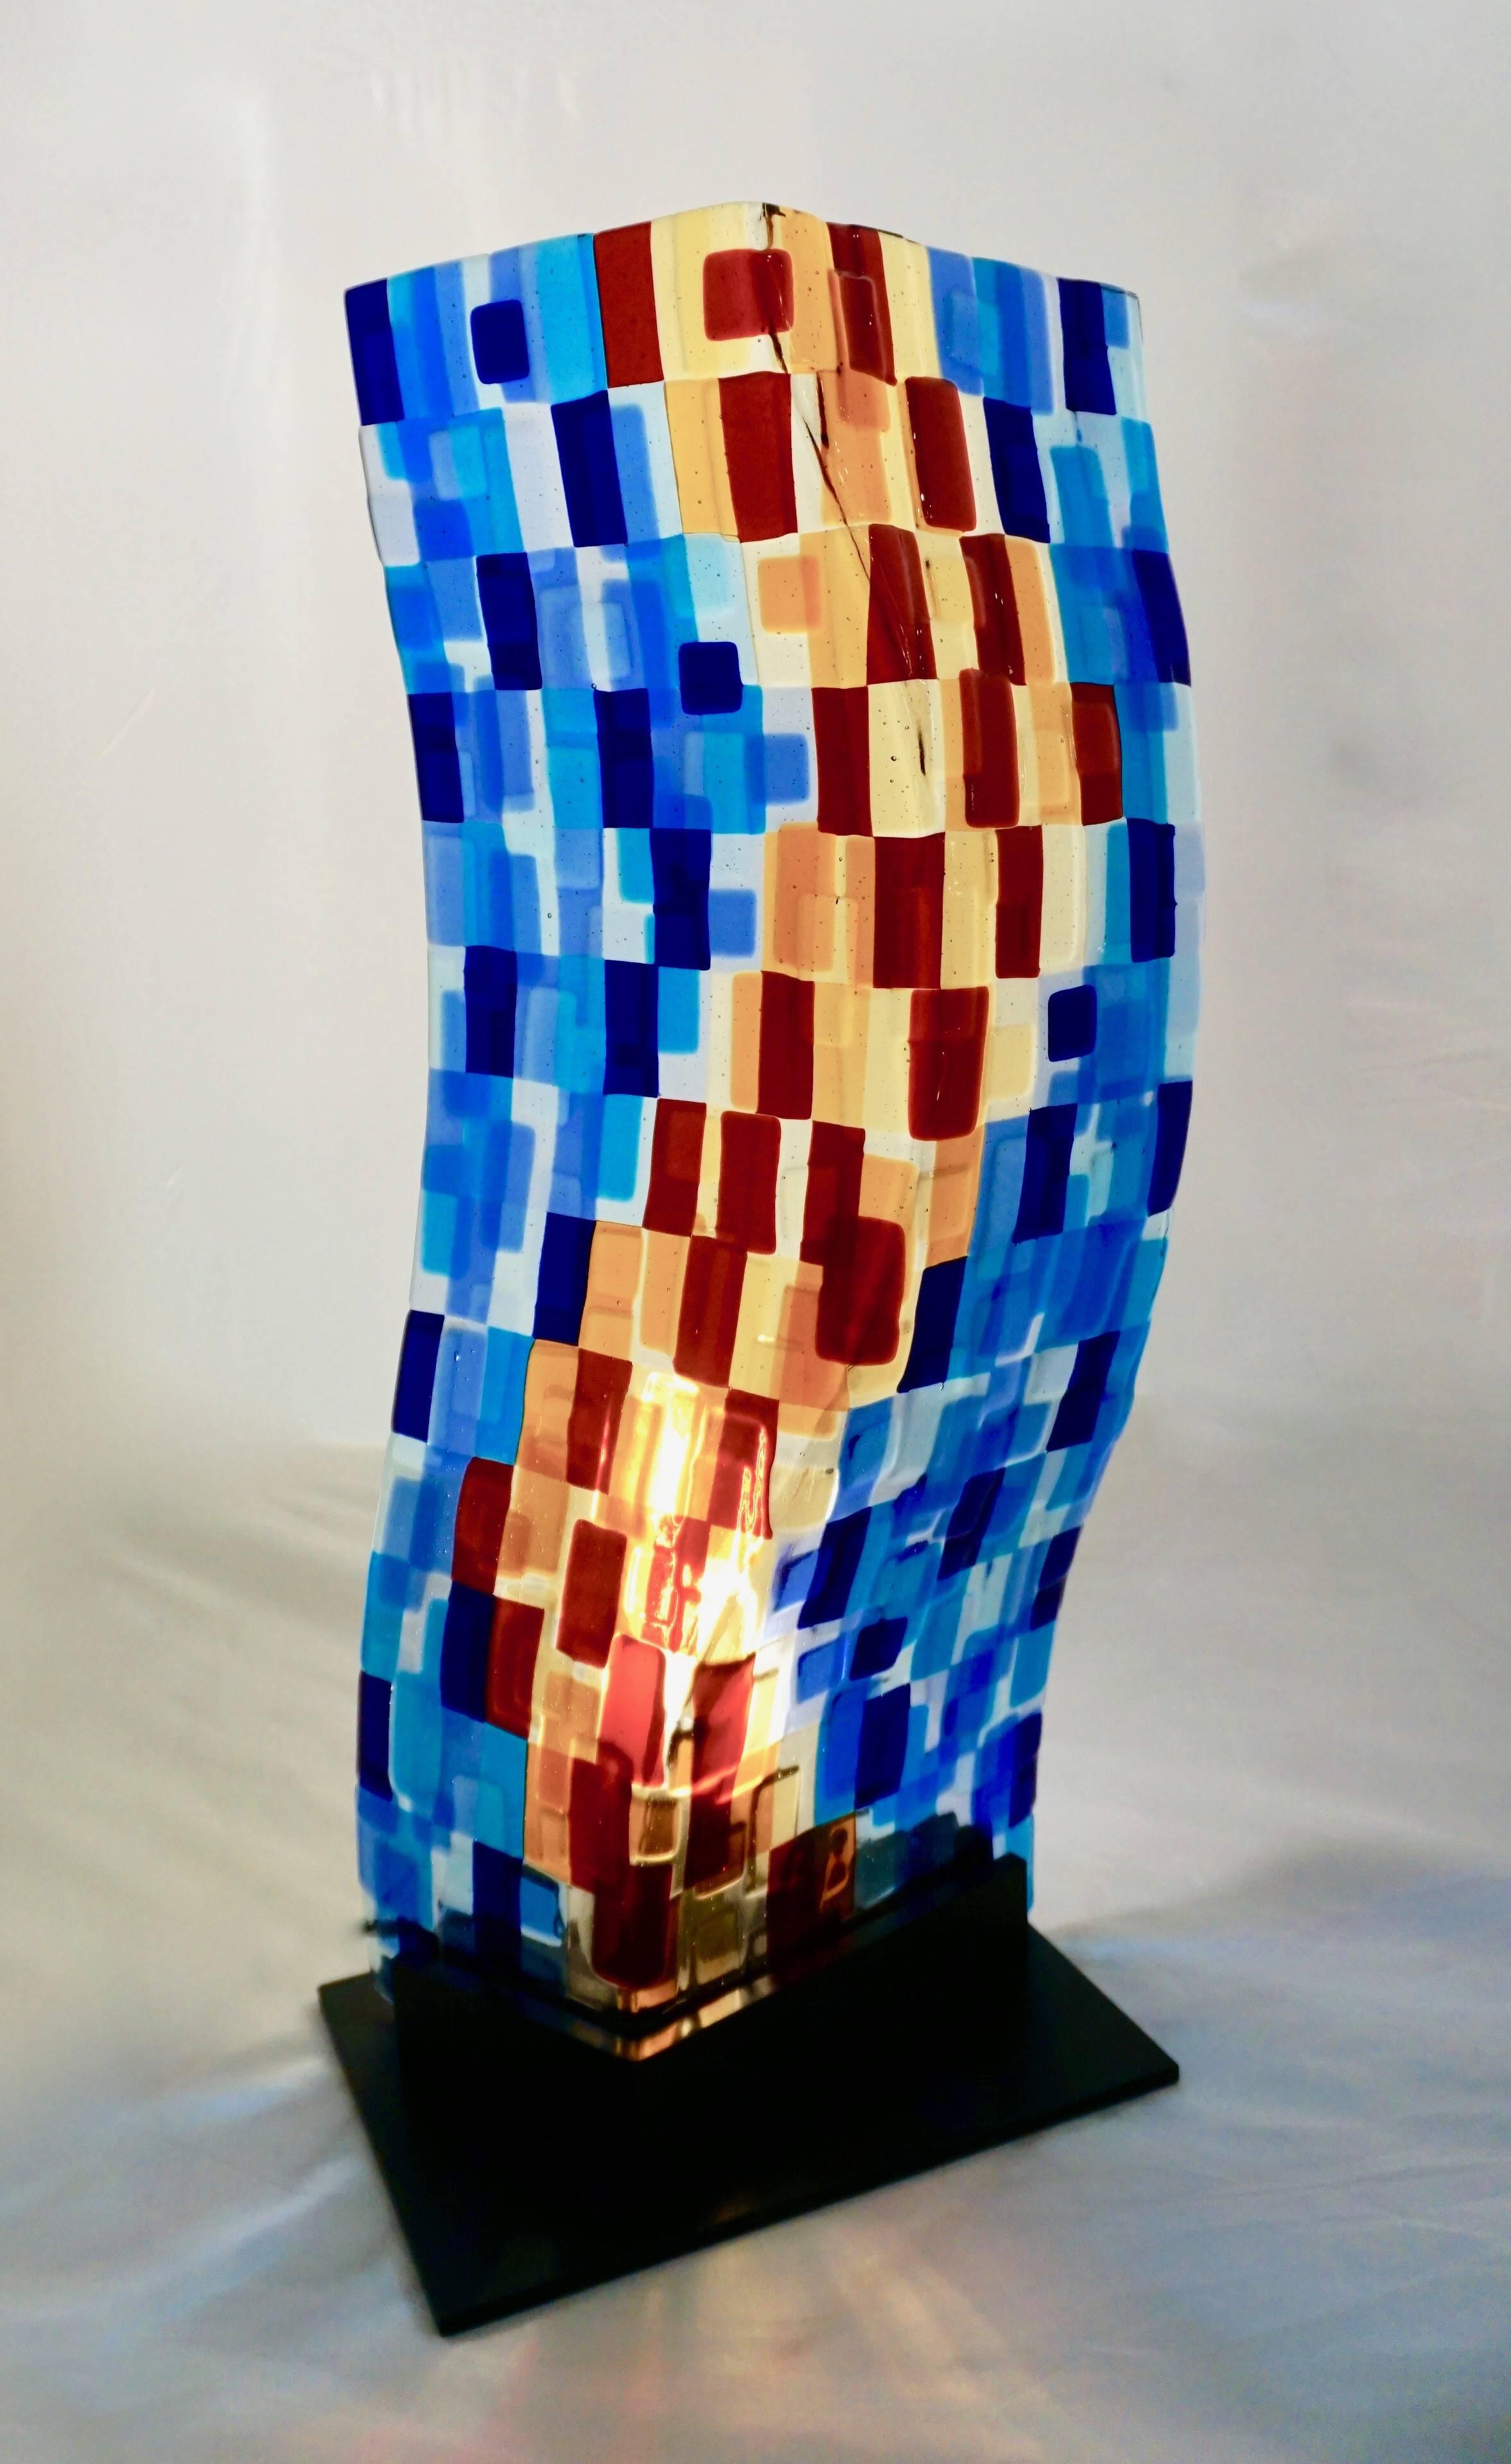 Contemporary modern Murano Art Glass abstract sculpture lamp, a decorative illuminated curved glass panel on a black lacquered metal base, realized as a colorful Mosaic, tones of azure and blues, yellow, red and burgundy plum: high quality of